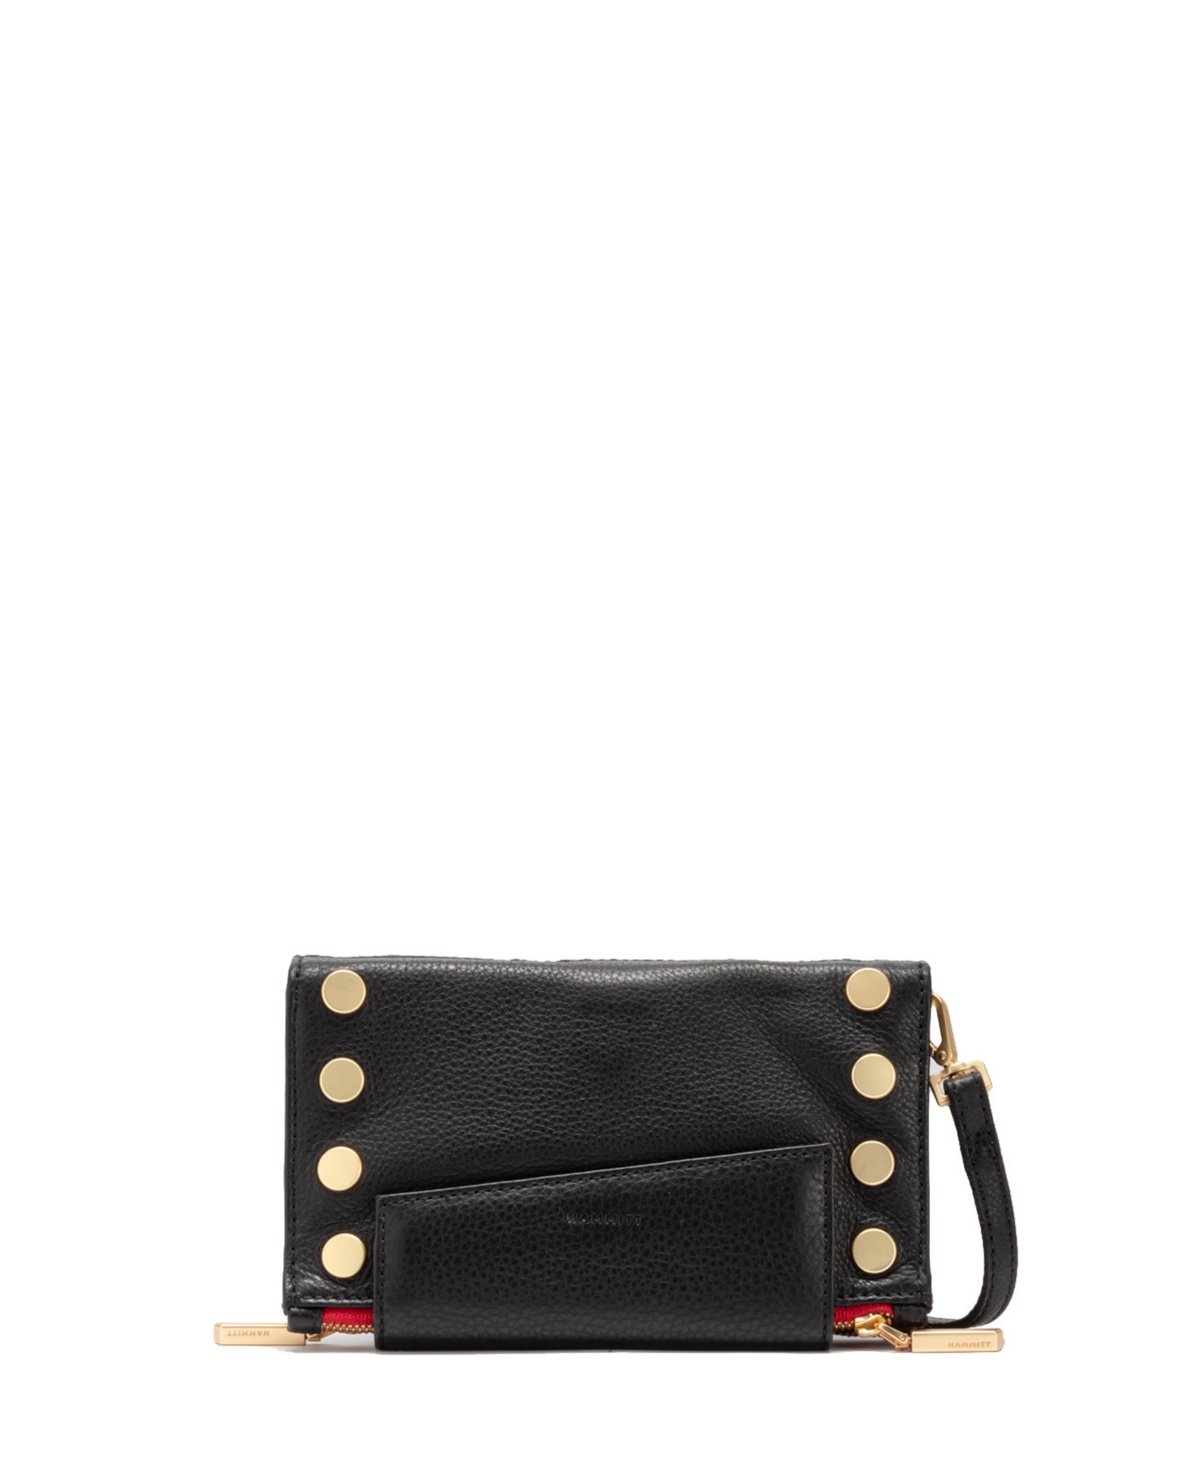 Hammitt Levy Leather Wallet Crossbody In Black Brushed Gold Red Zip